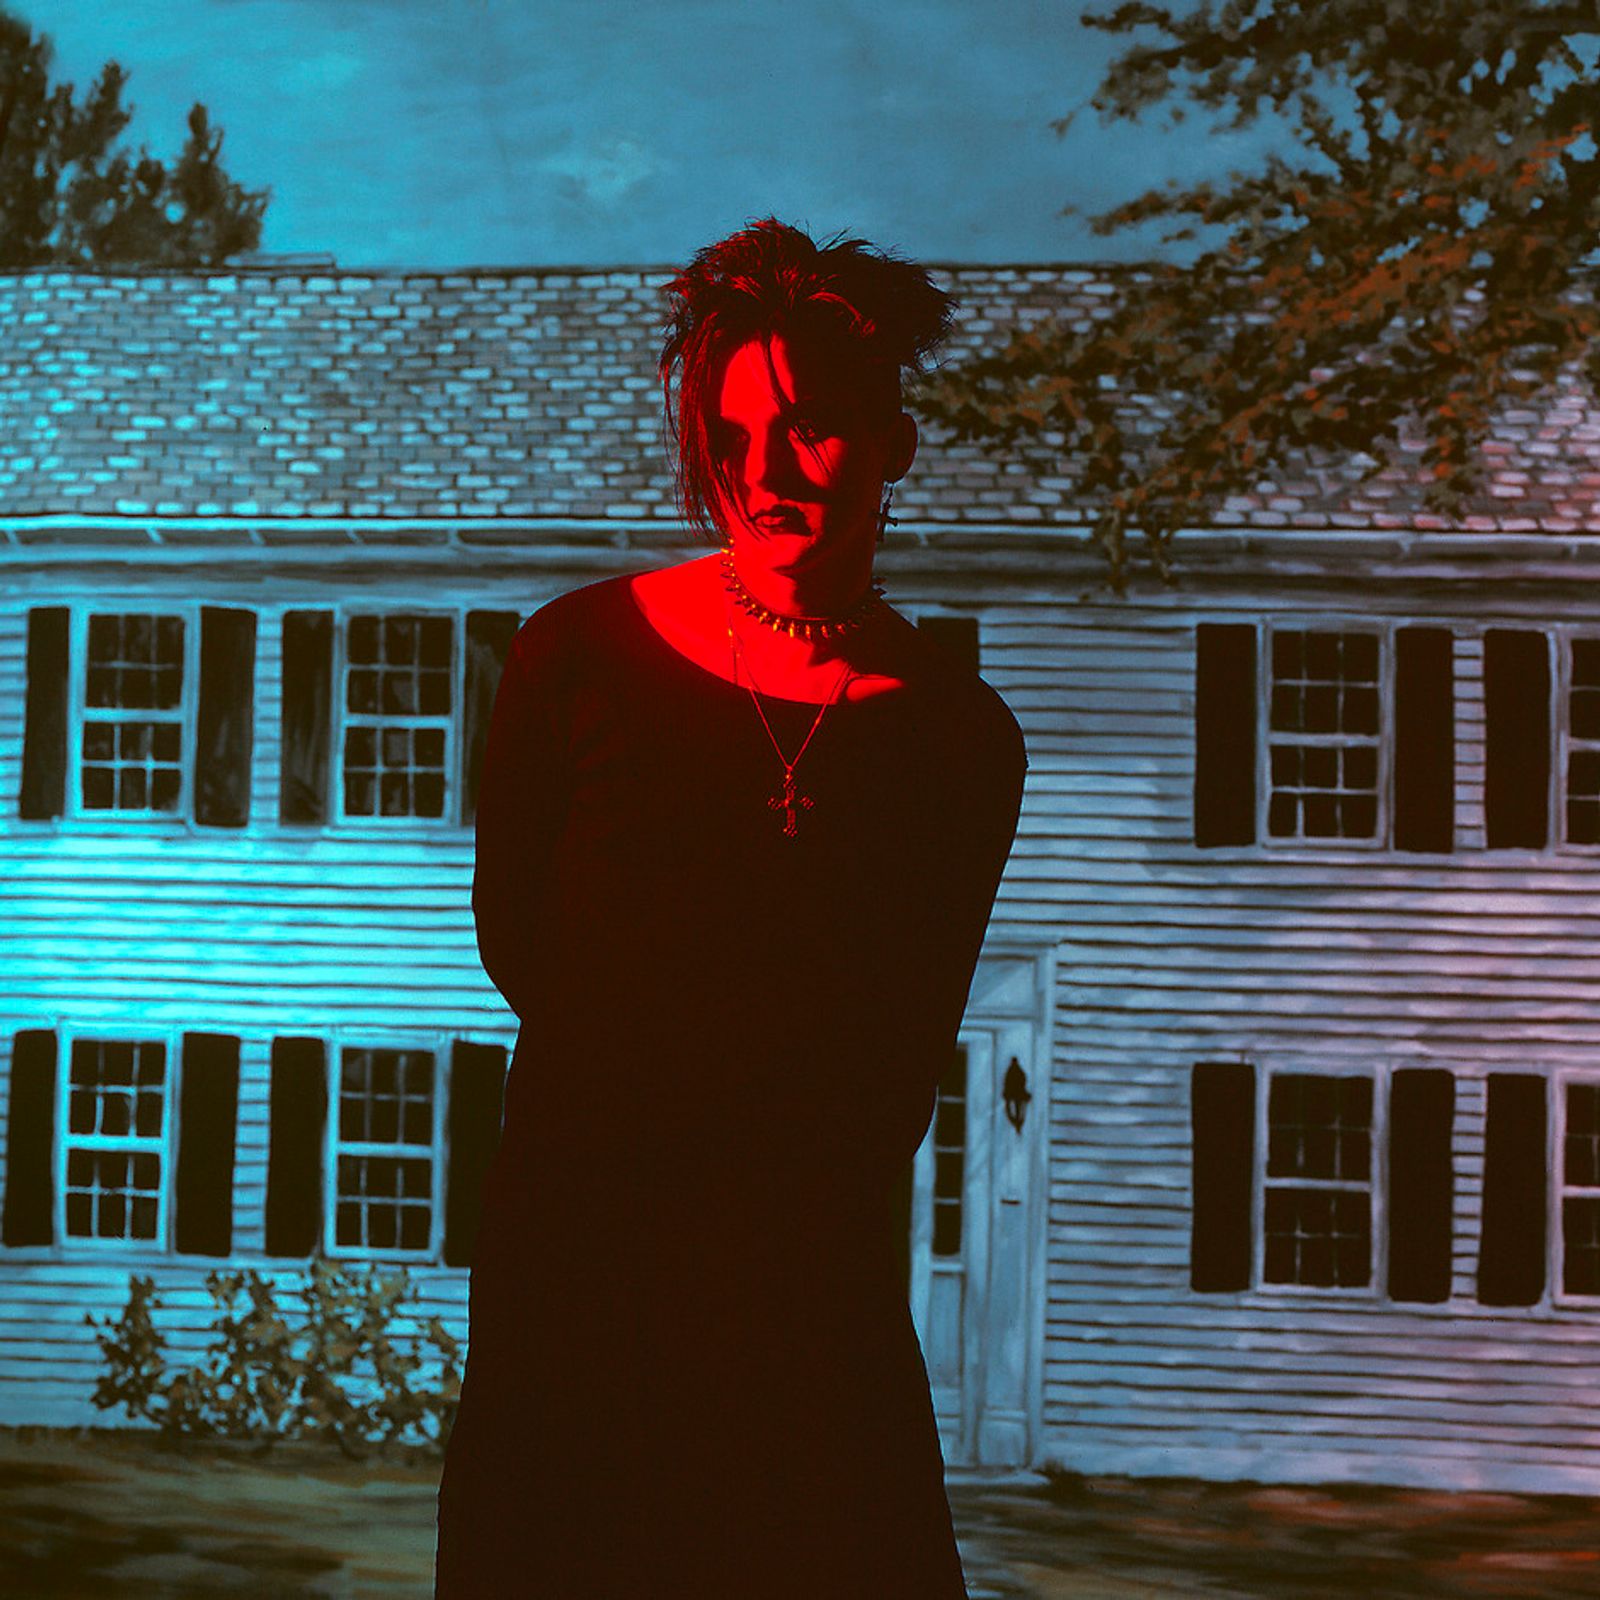 © Steven Edson - Goth man bathed in red light in front of house